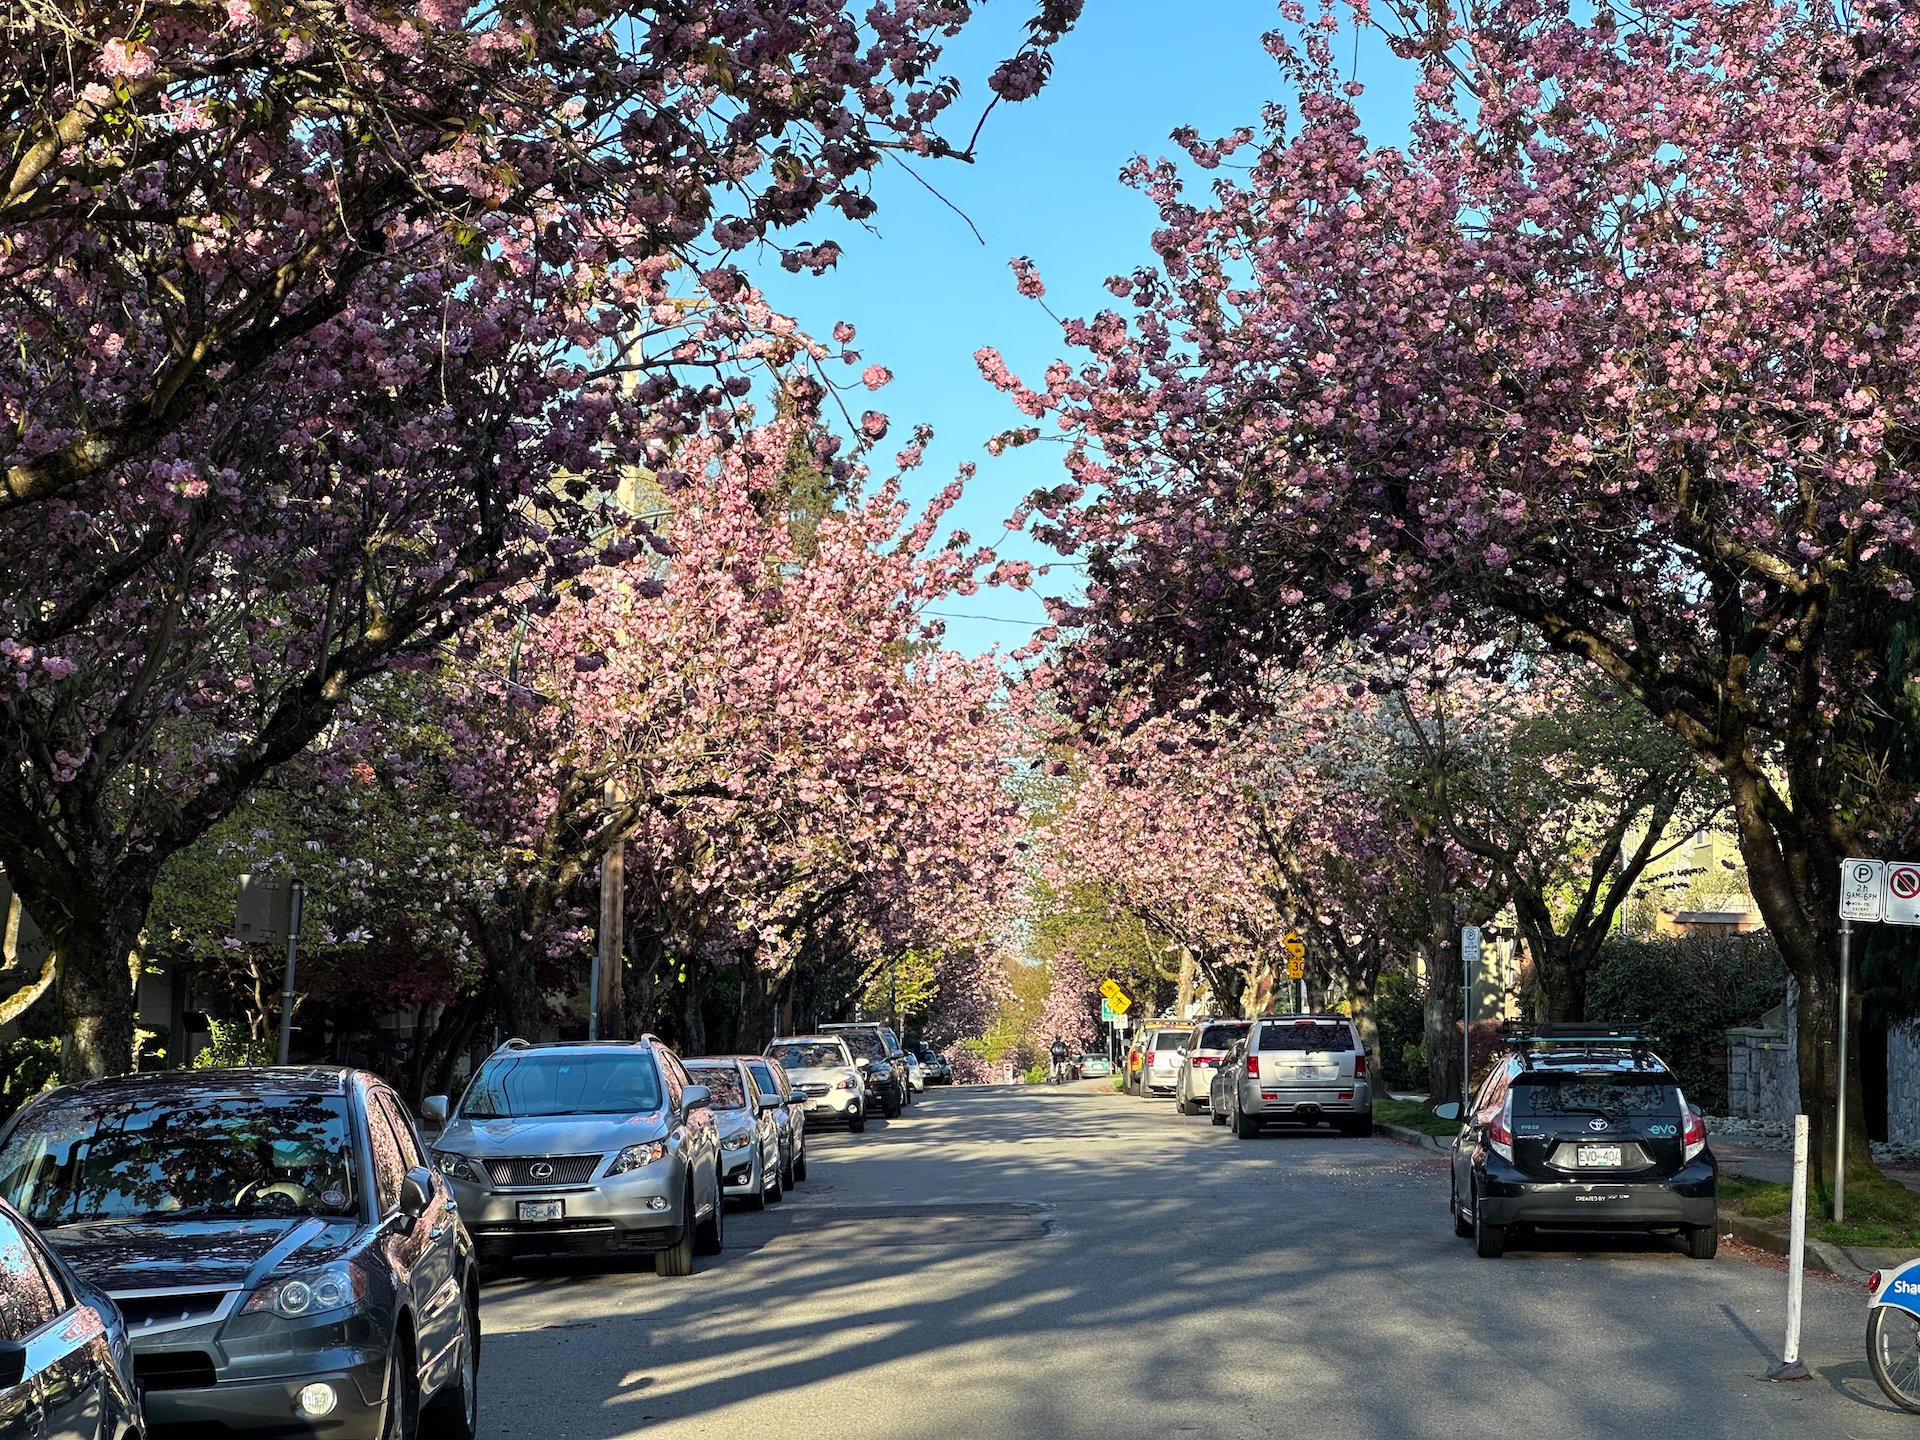  7th Avenue runs just above our building and has the most amazing cherry blossoms. This stretch is late blooming.  